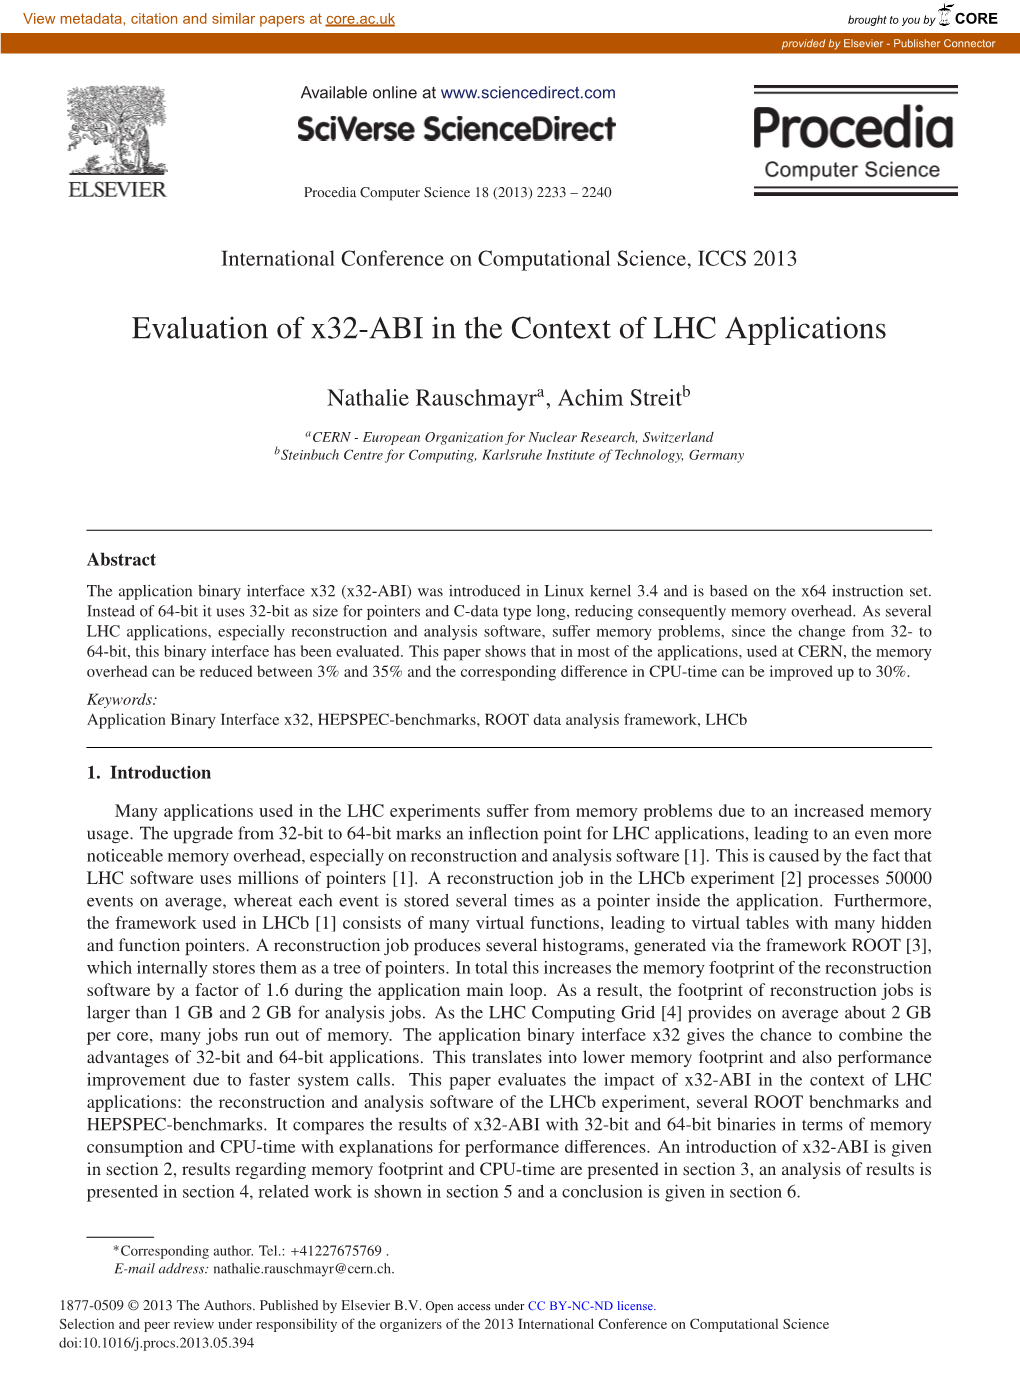 Evaluation of X32-ABI in the Context of LHC Applications